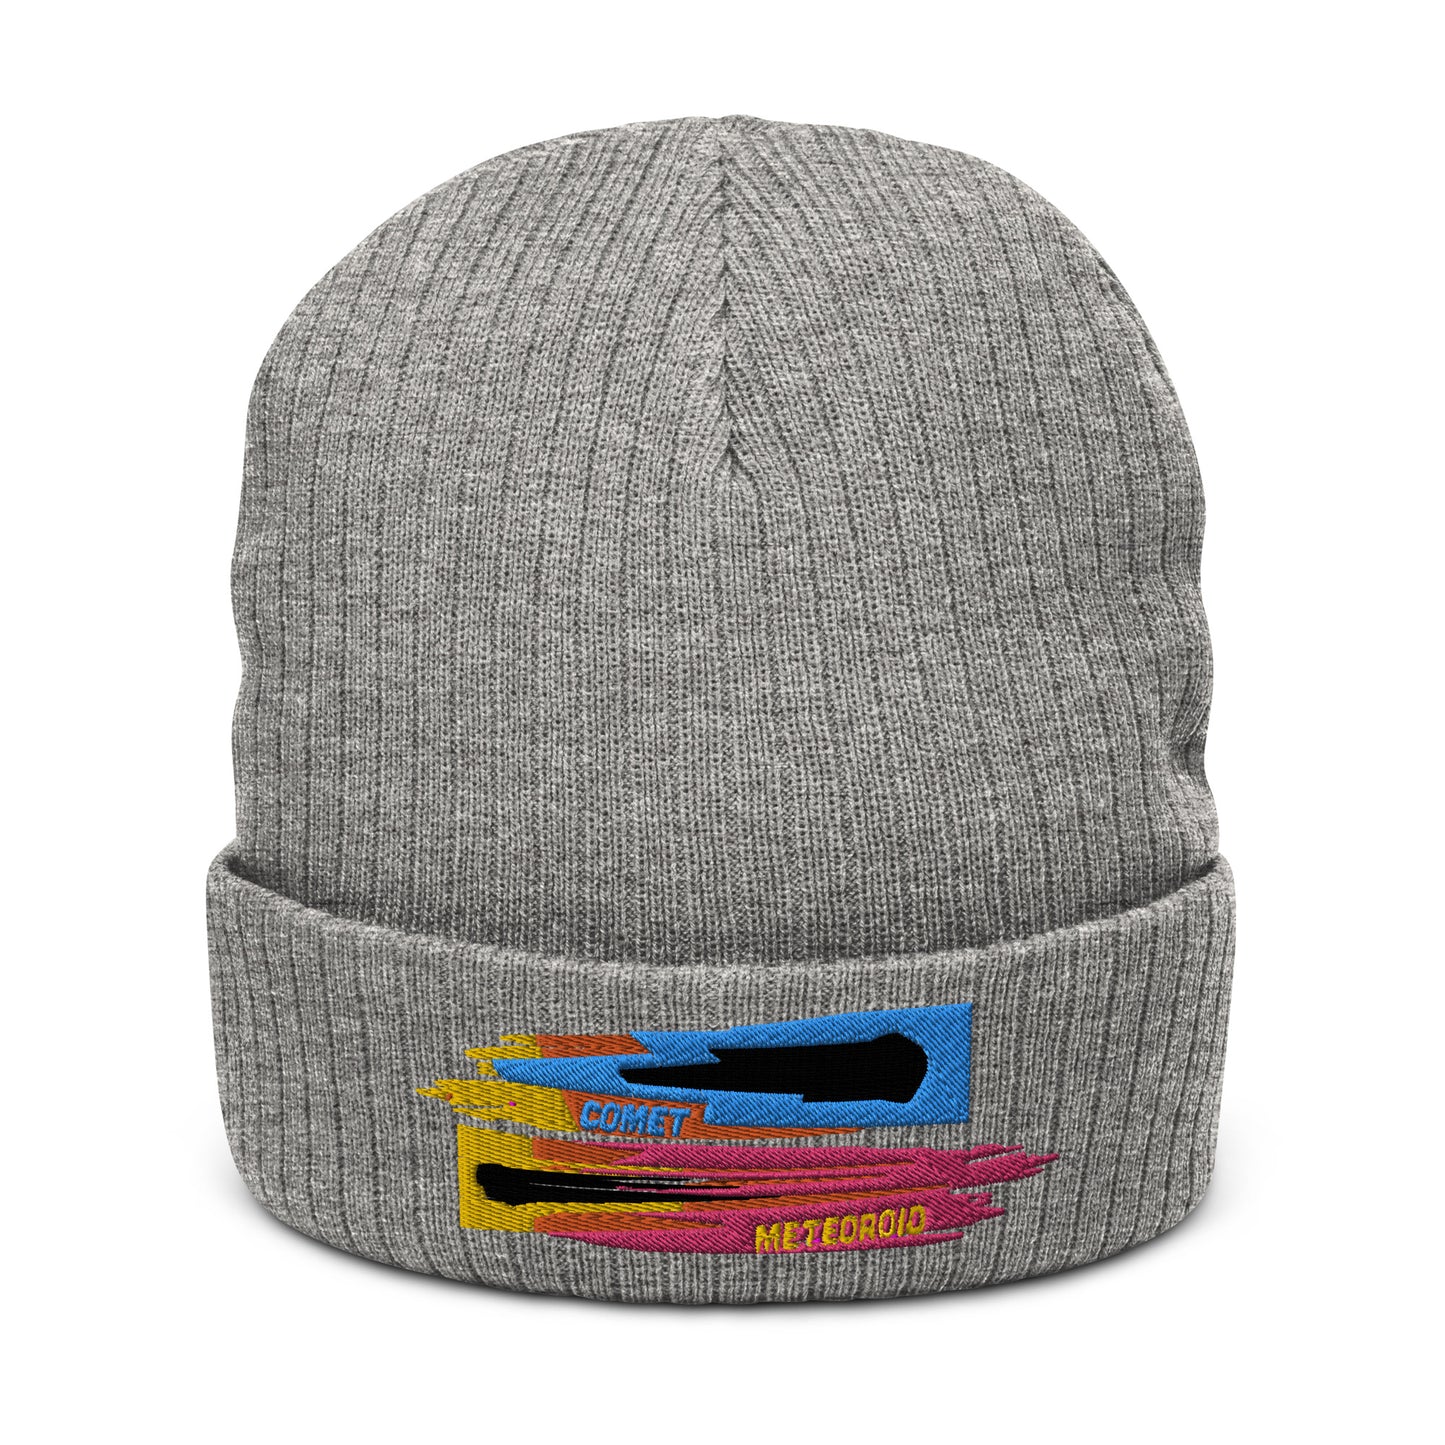 Comet and Meteoroid Ribbed knit beanie